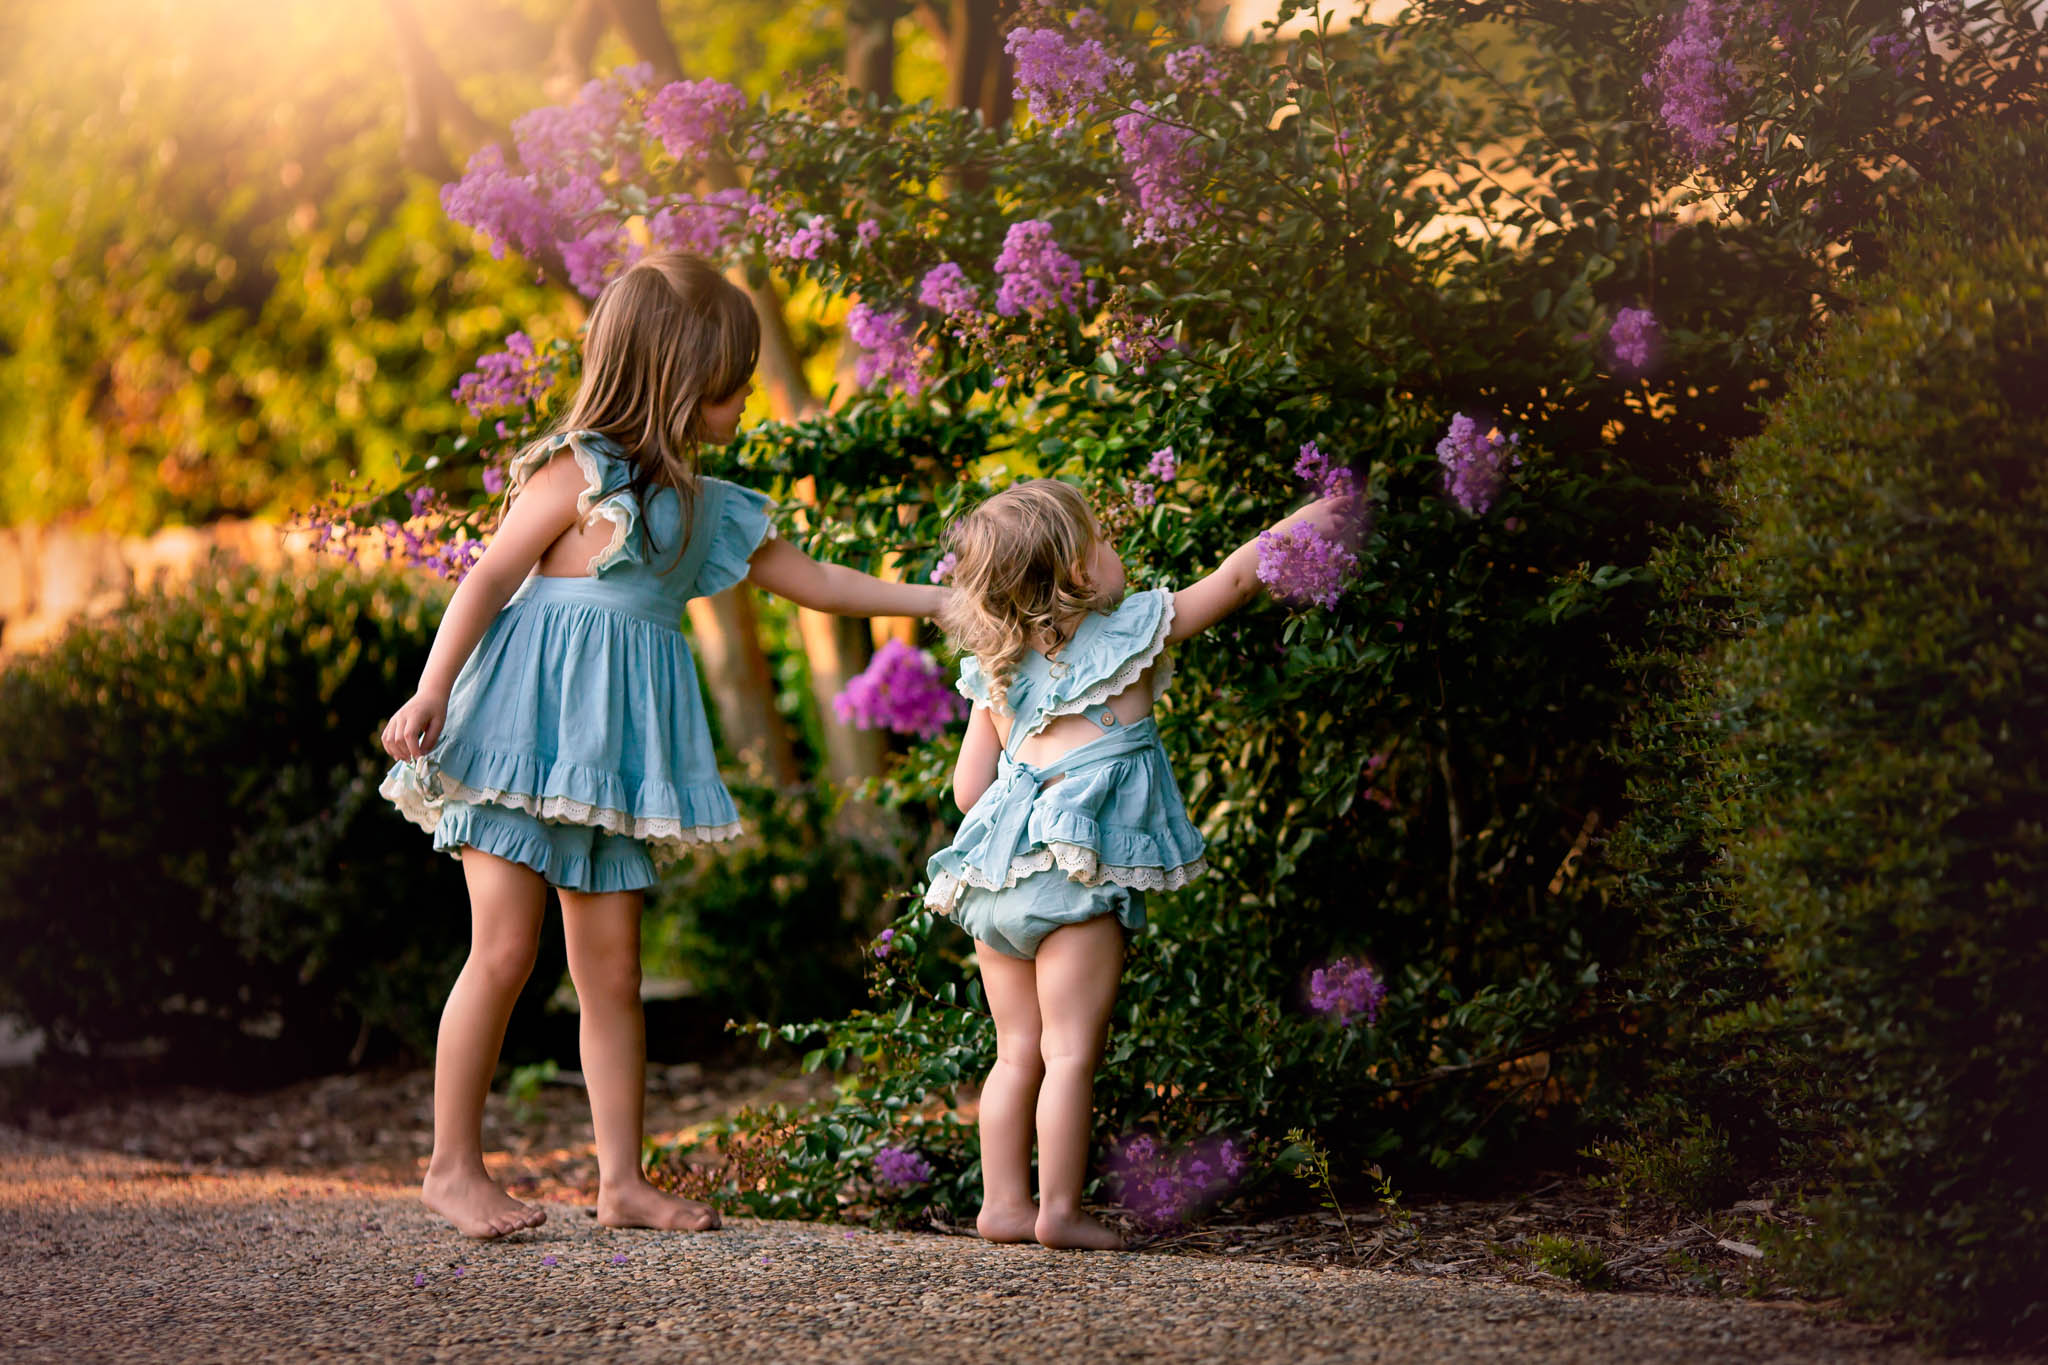 Two sisters in matching blue dresses pick purple flowers barefoot in a park pattywhacks